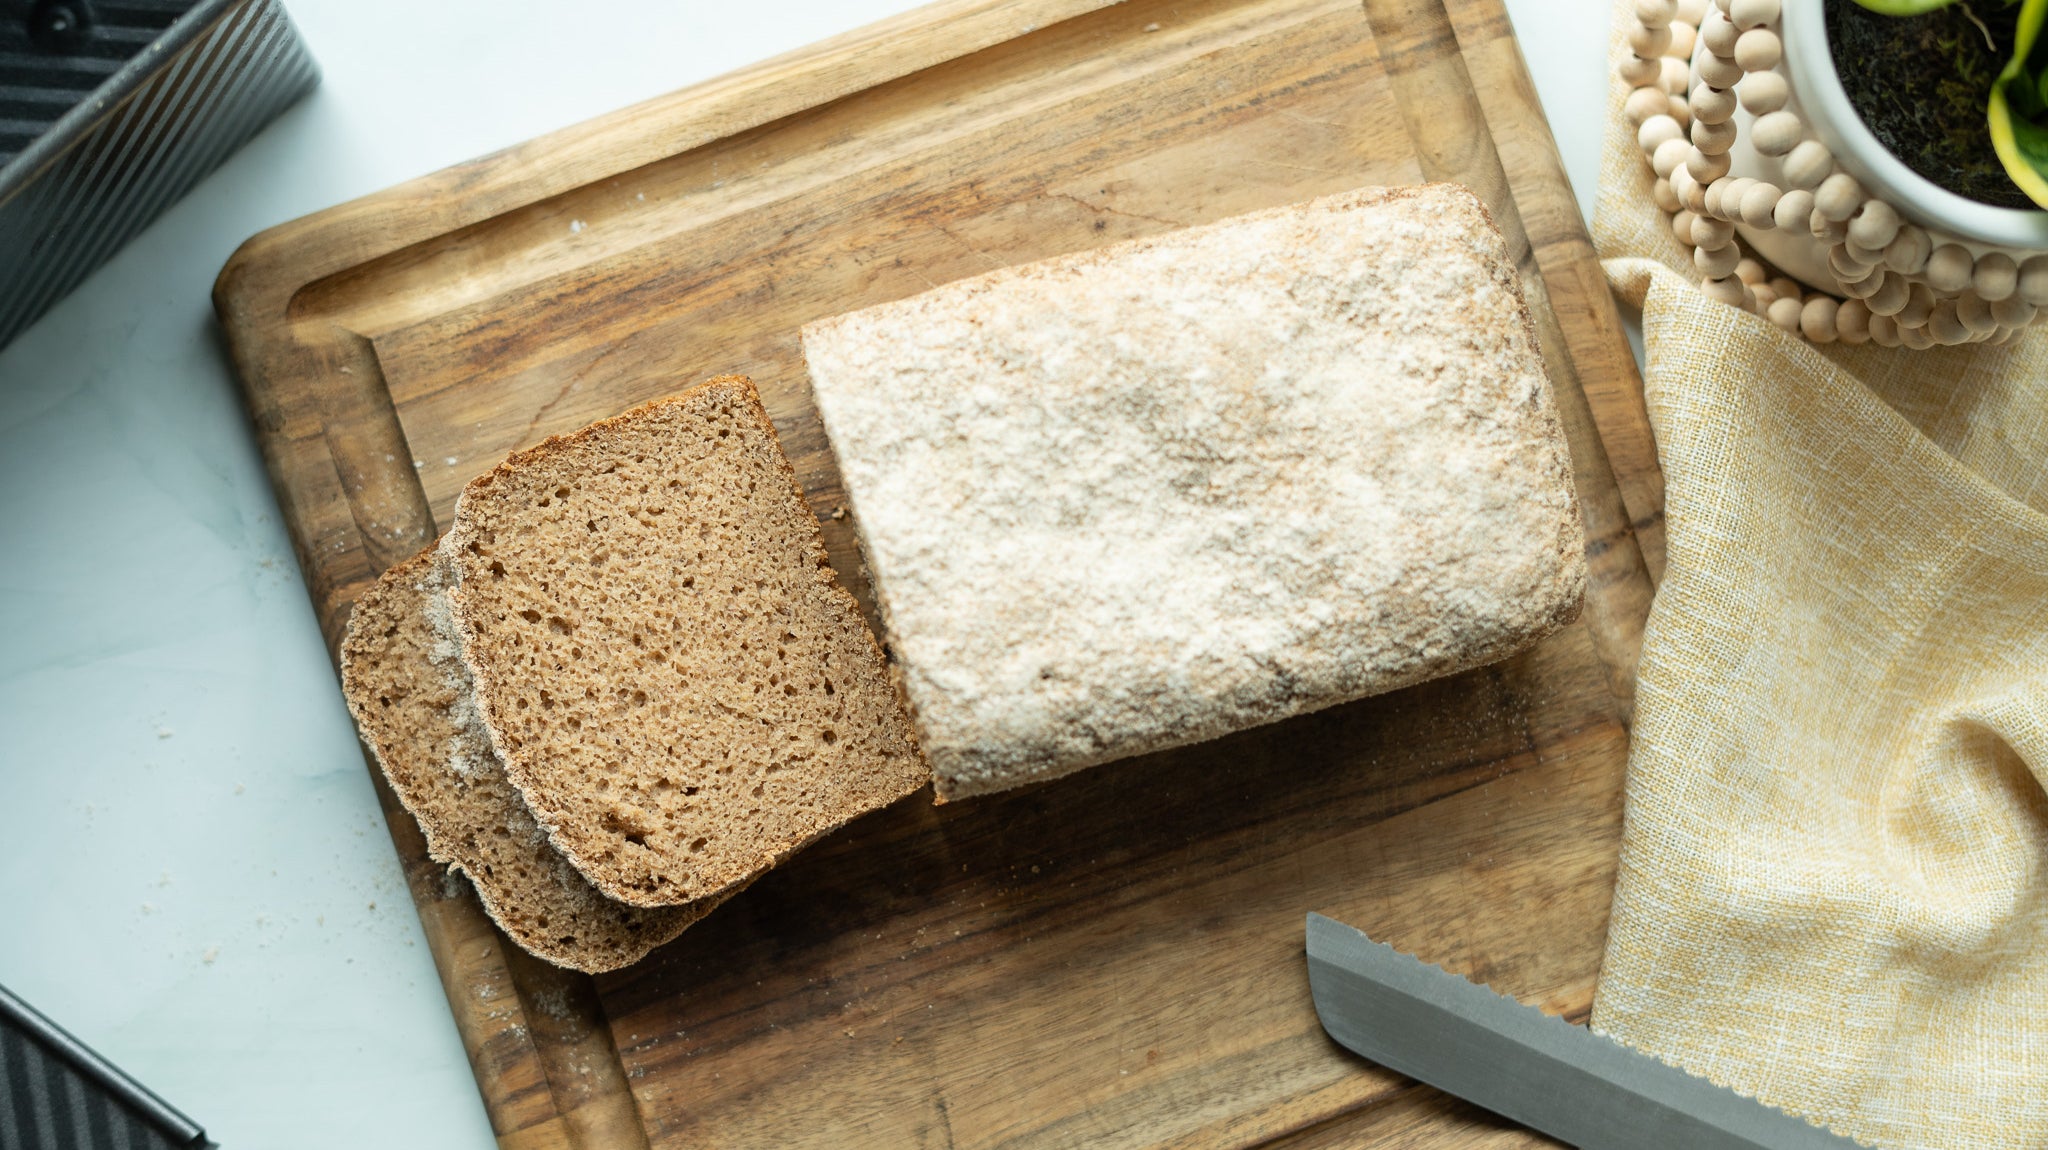 How To Make a BREAD LOAF Using the Artisan Baking Mix